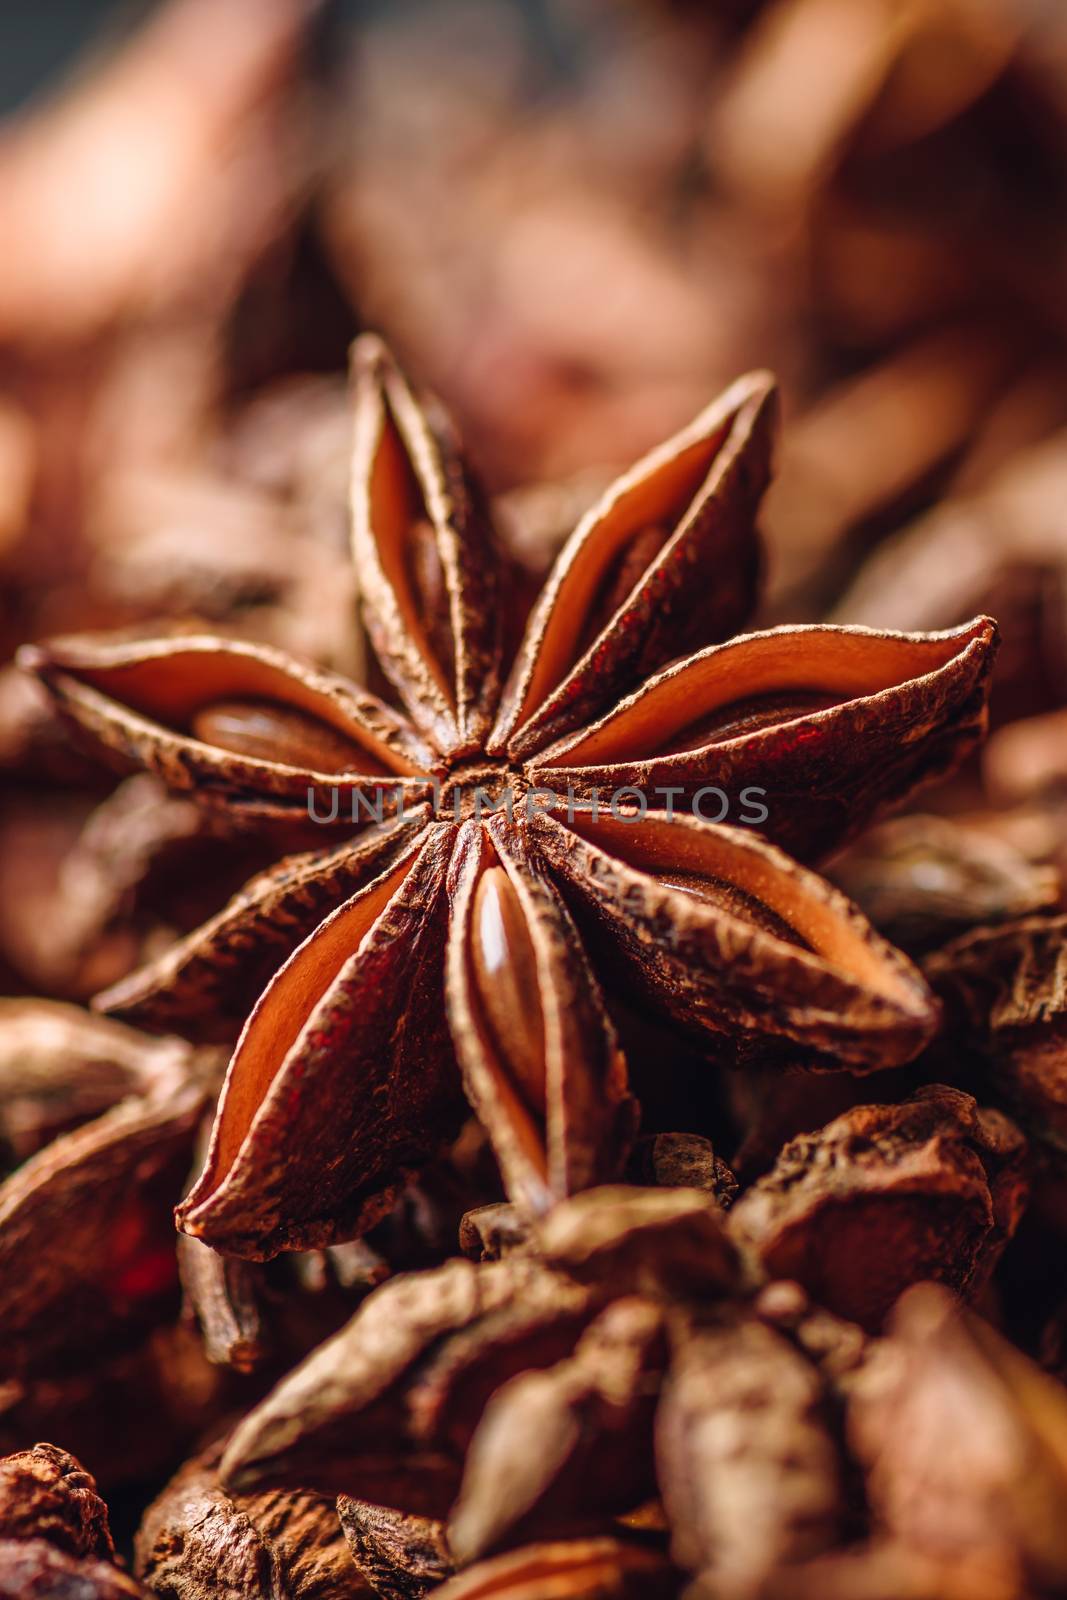 Background of Star Anise Fruits and Seeds. Vertical Orientation.